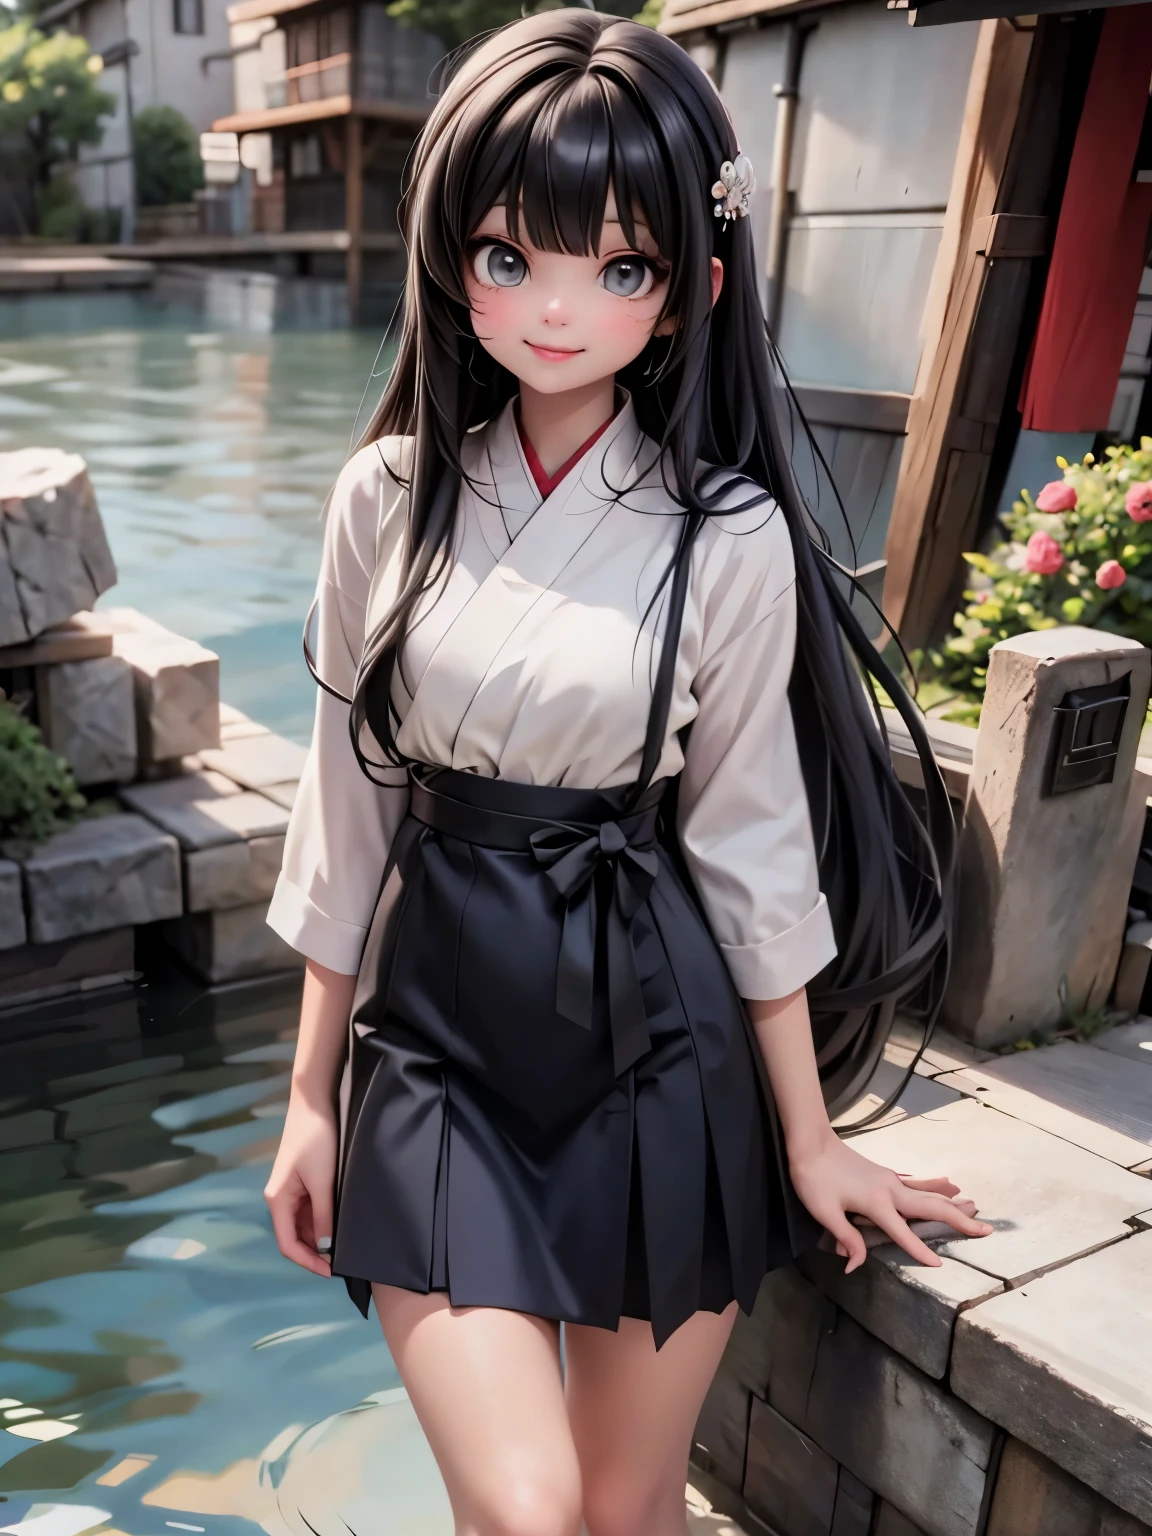 there is a woman that is standing on a rock by the water, beautiful anim girl, japanese girl casual dress, casual dress, wearing casual dress, anime girl with long hair